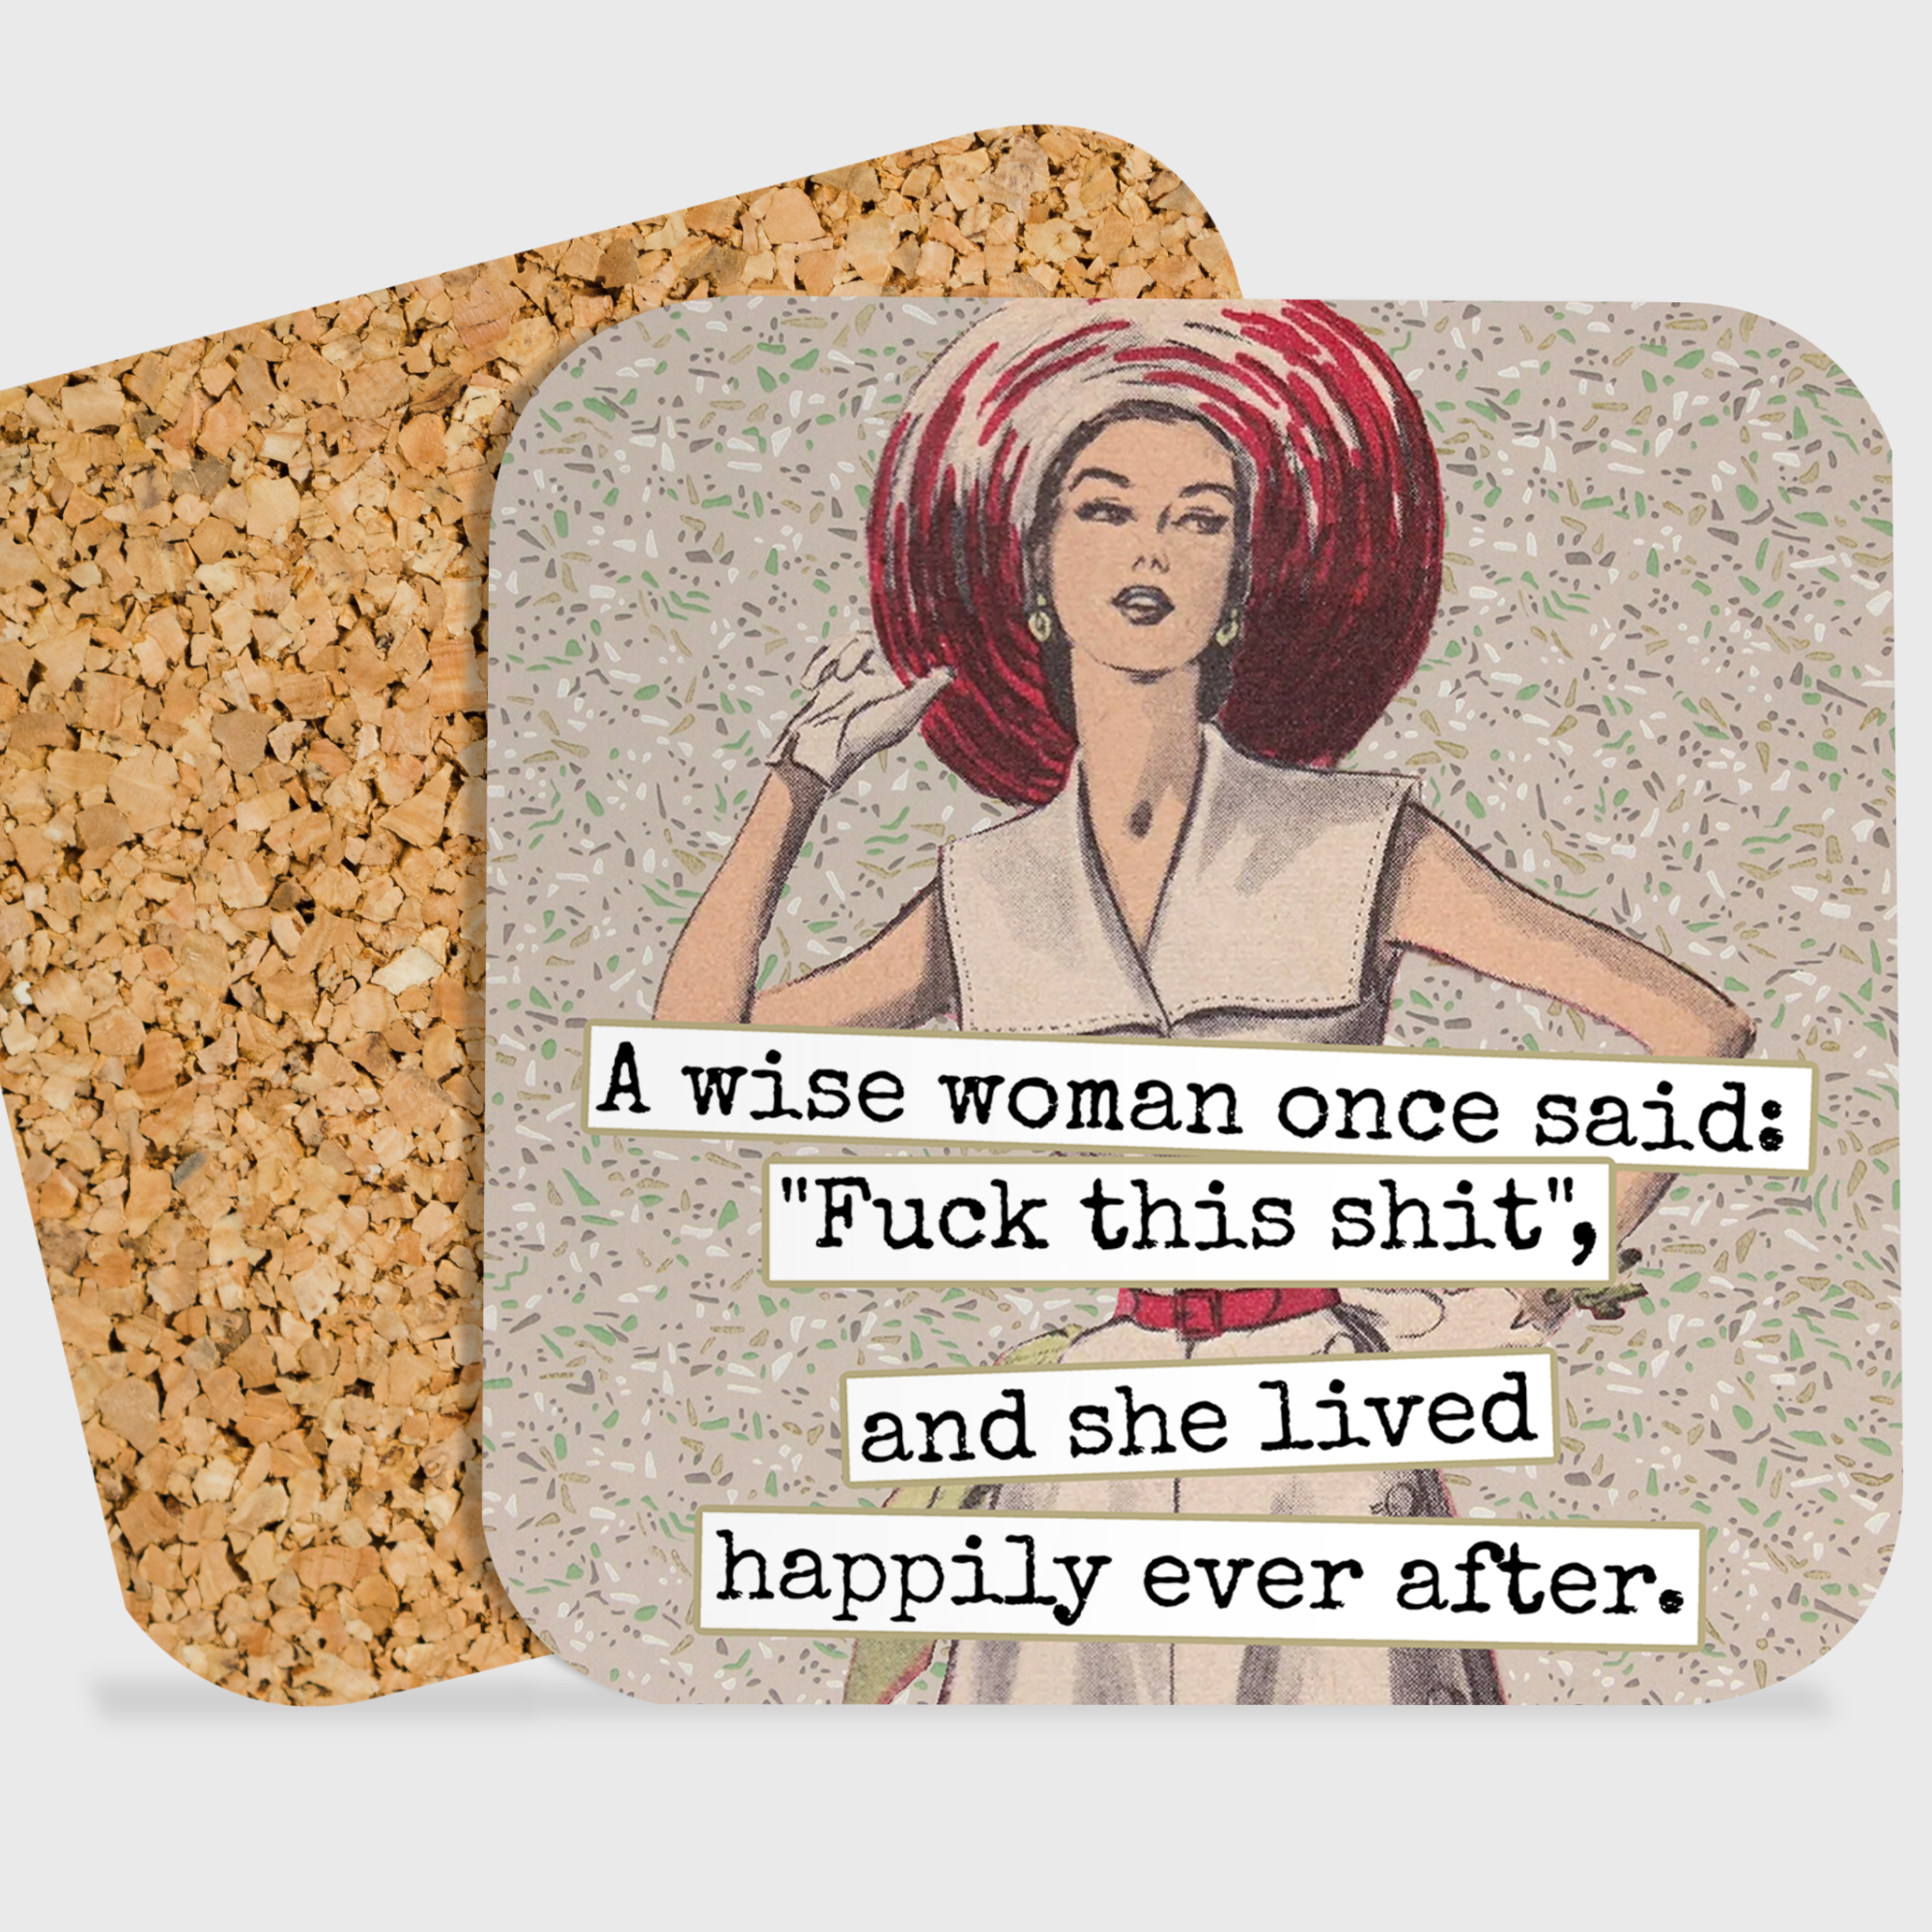 COASTER. A Wise Woman Once Said: "Fuck This Shit"...